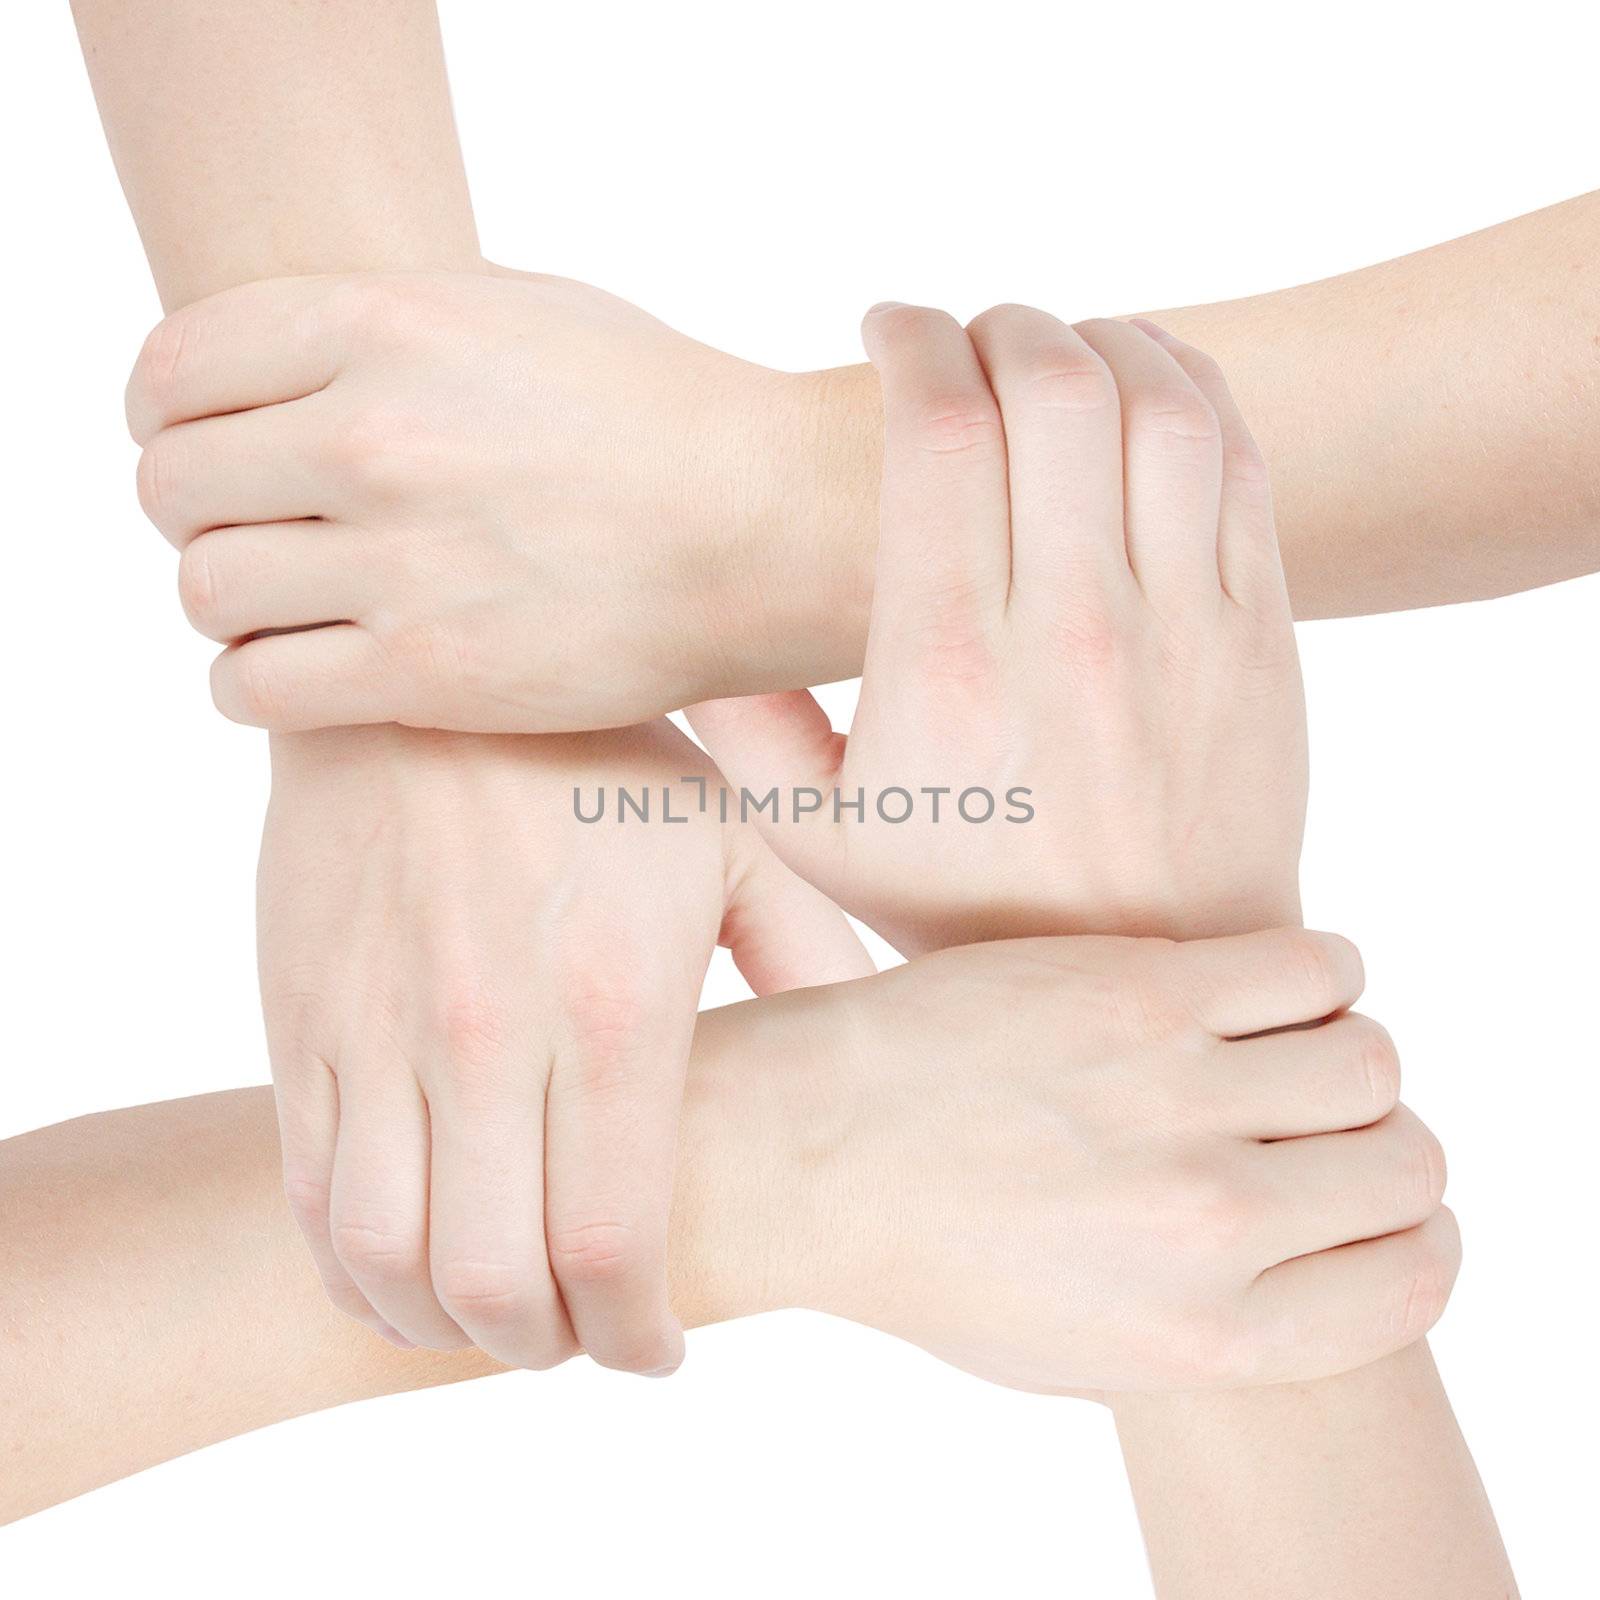 United hands